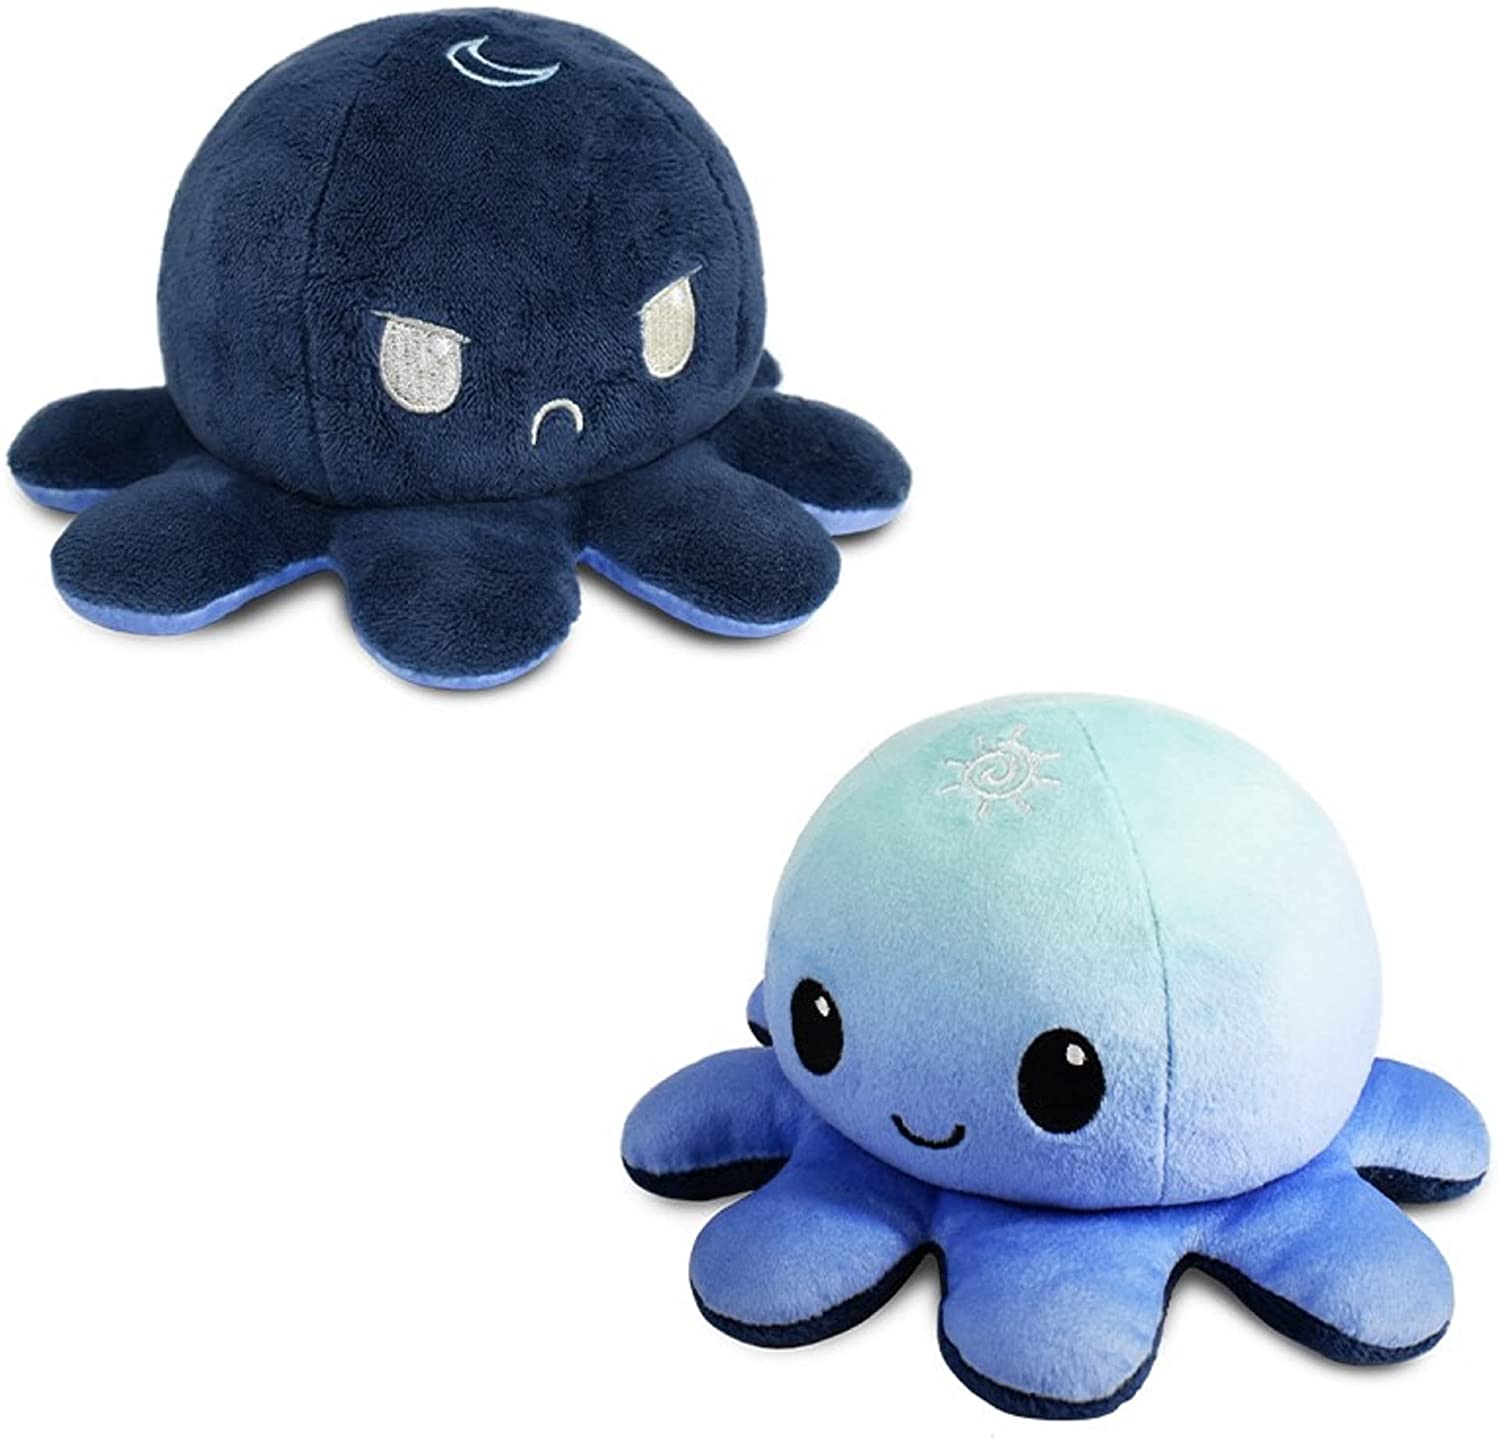 TeeTurtle | The Original Reversible Octopus Plushie | Day and Night $8.79